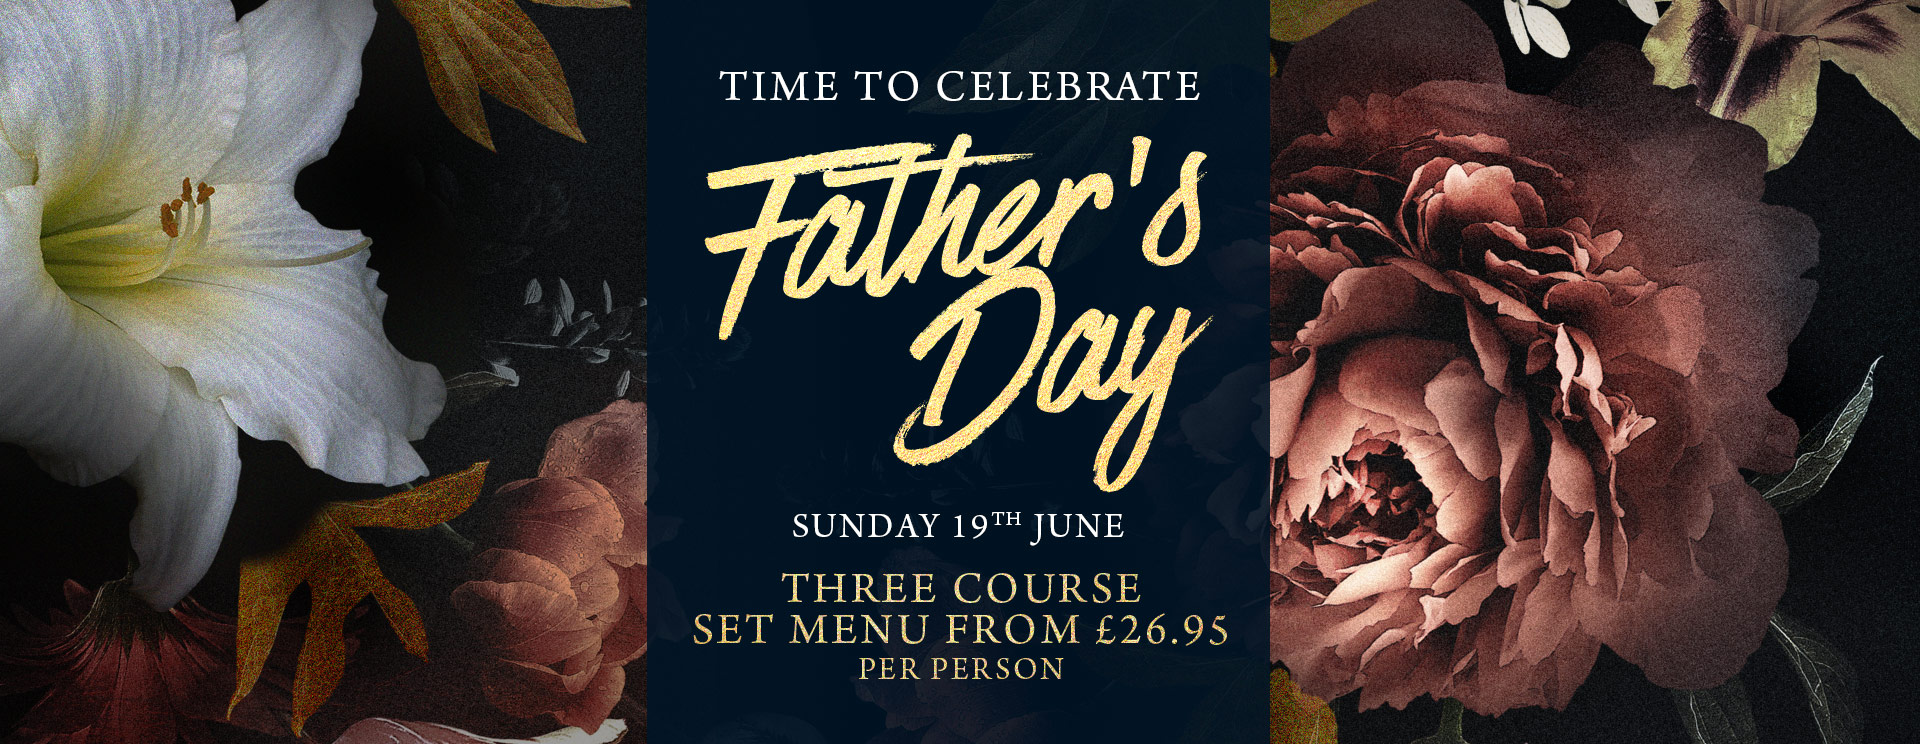 Fathers Day at The Apple Tree